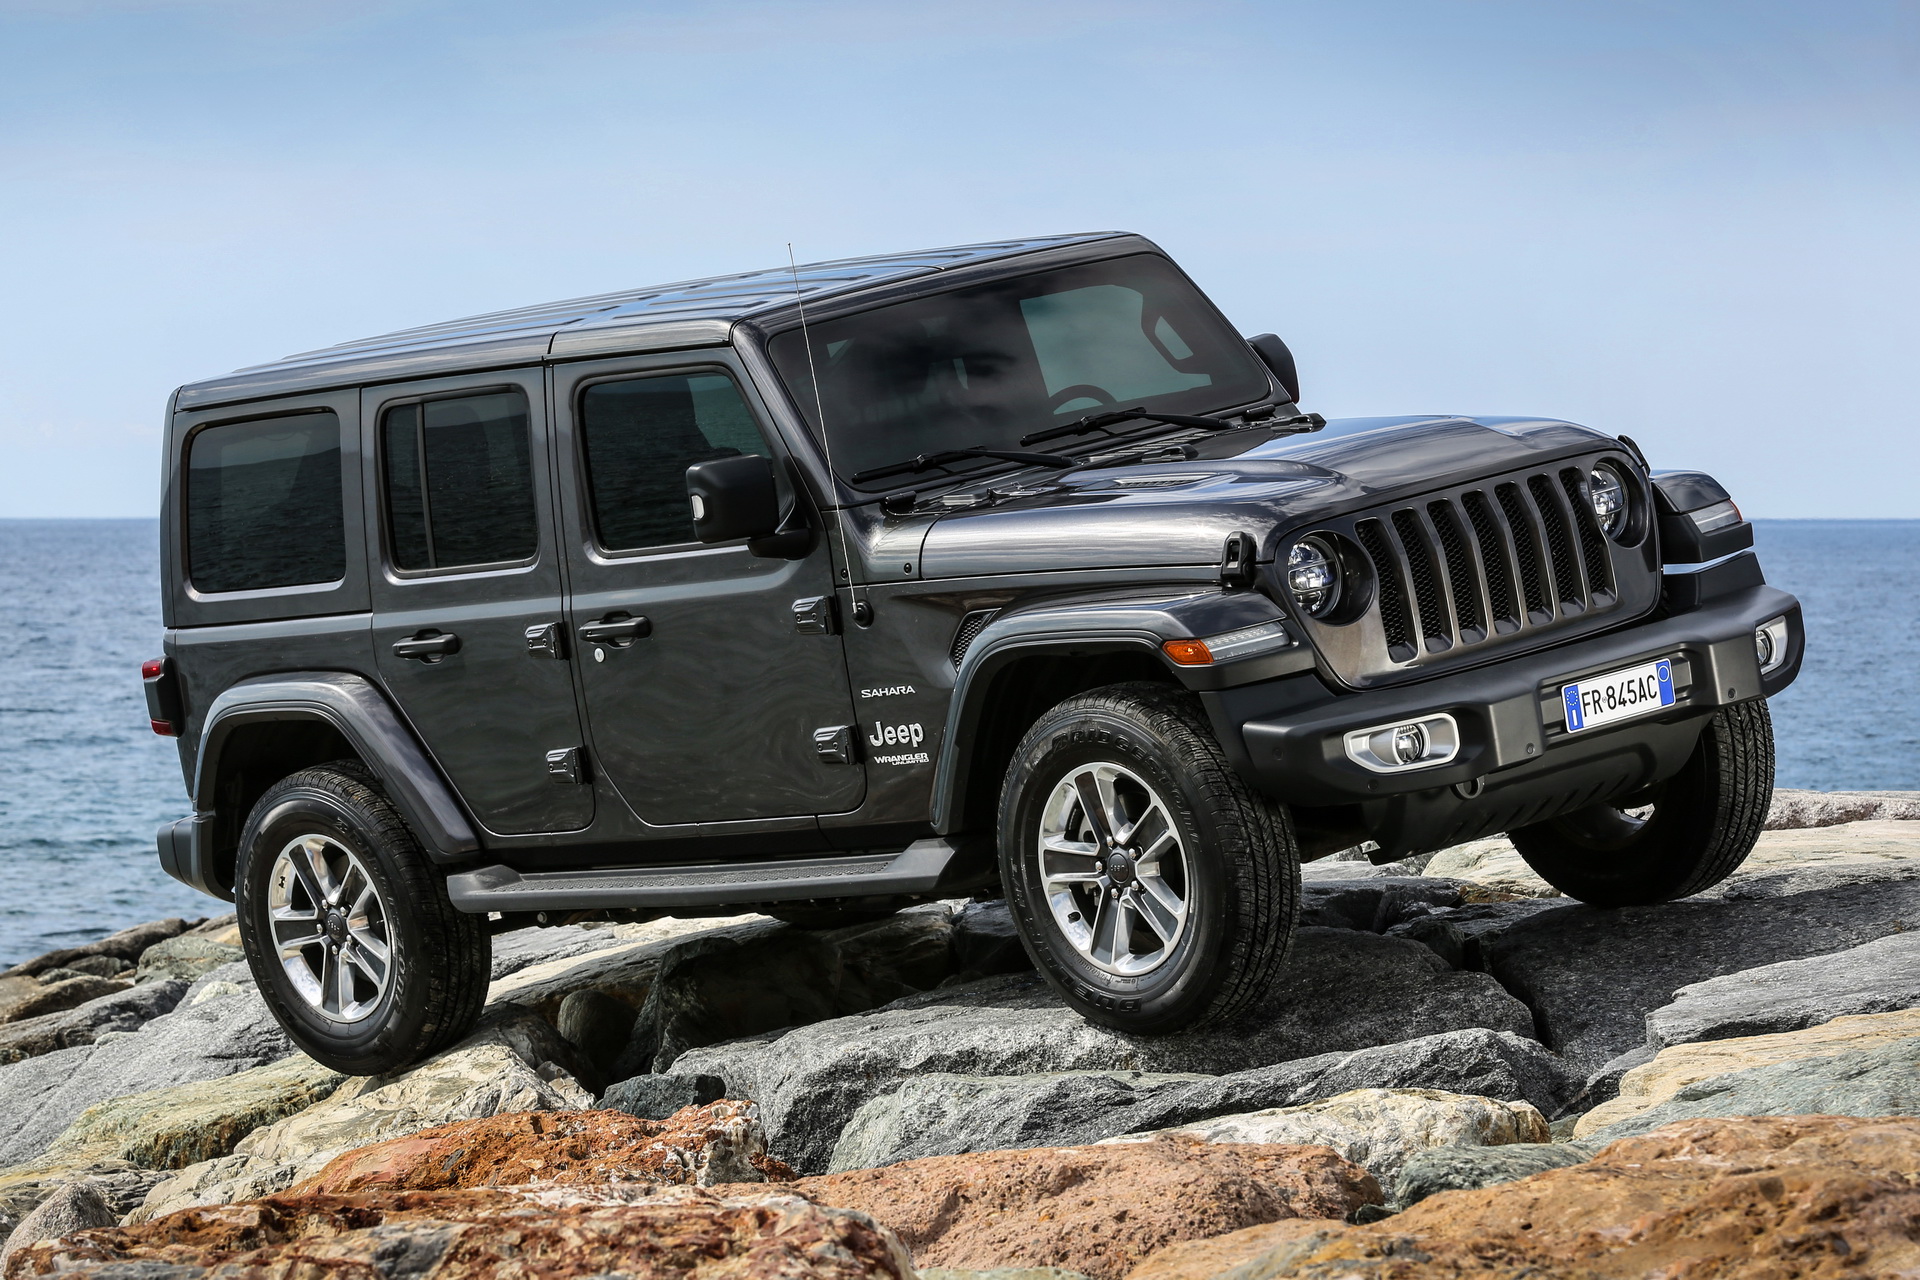 Euro-spec Jeep Wrangler Detailed, Will Feature 197HP 4-Cylinder Diesel |  Carscoops